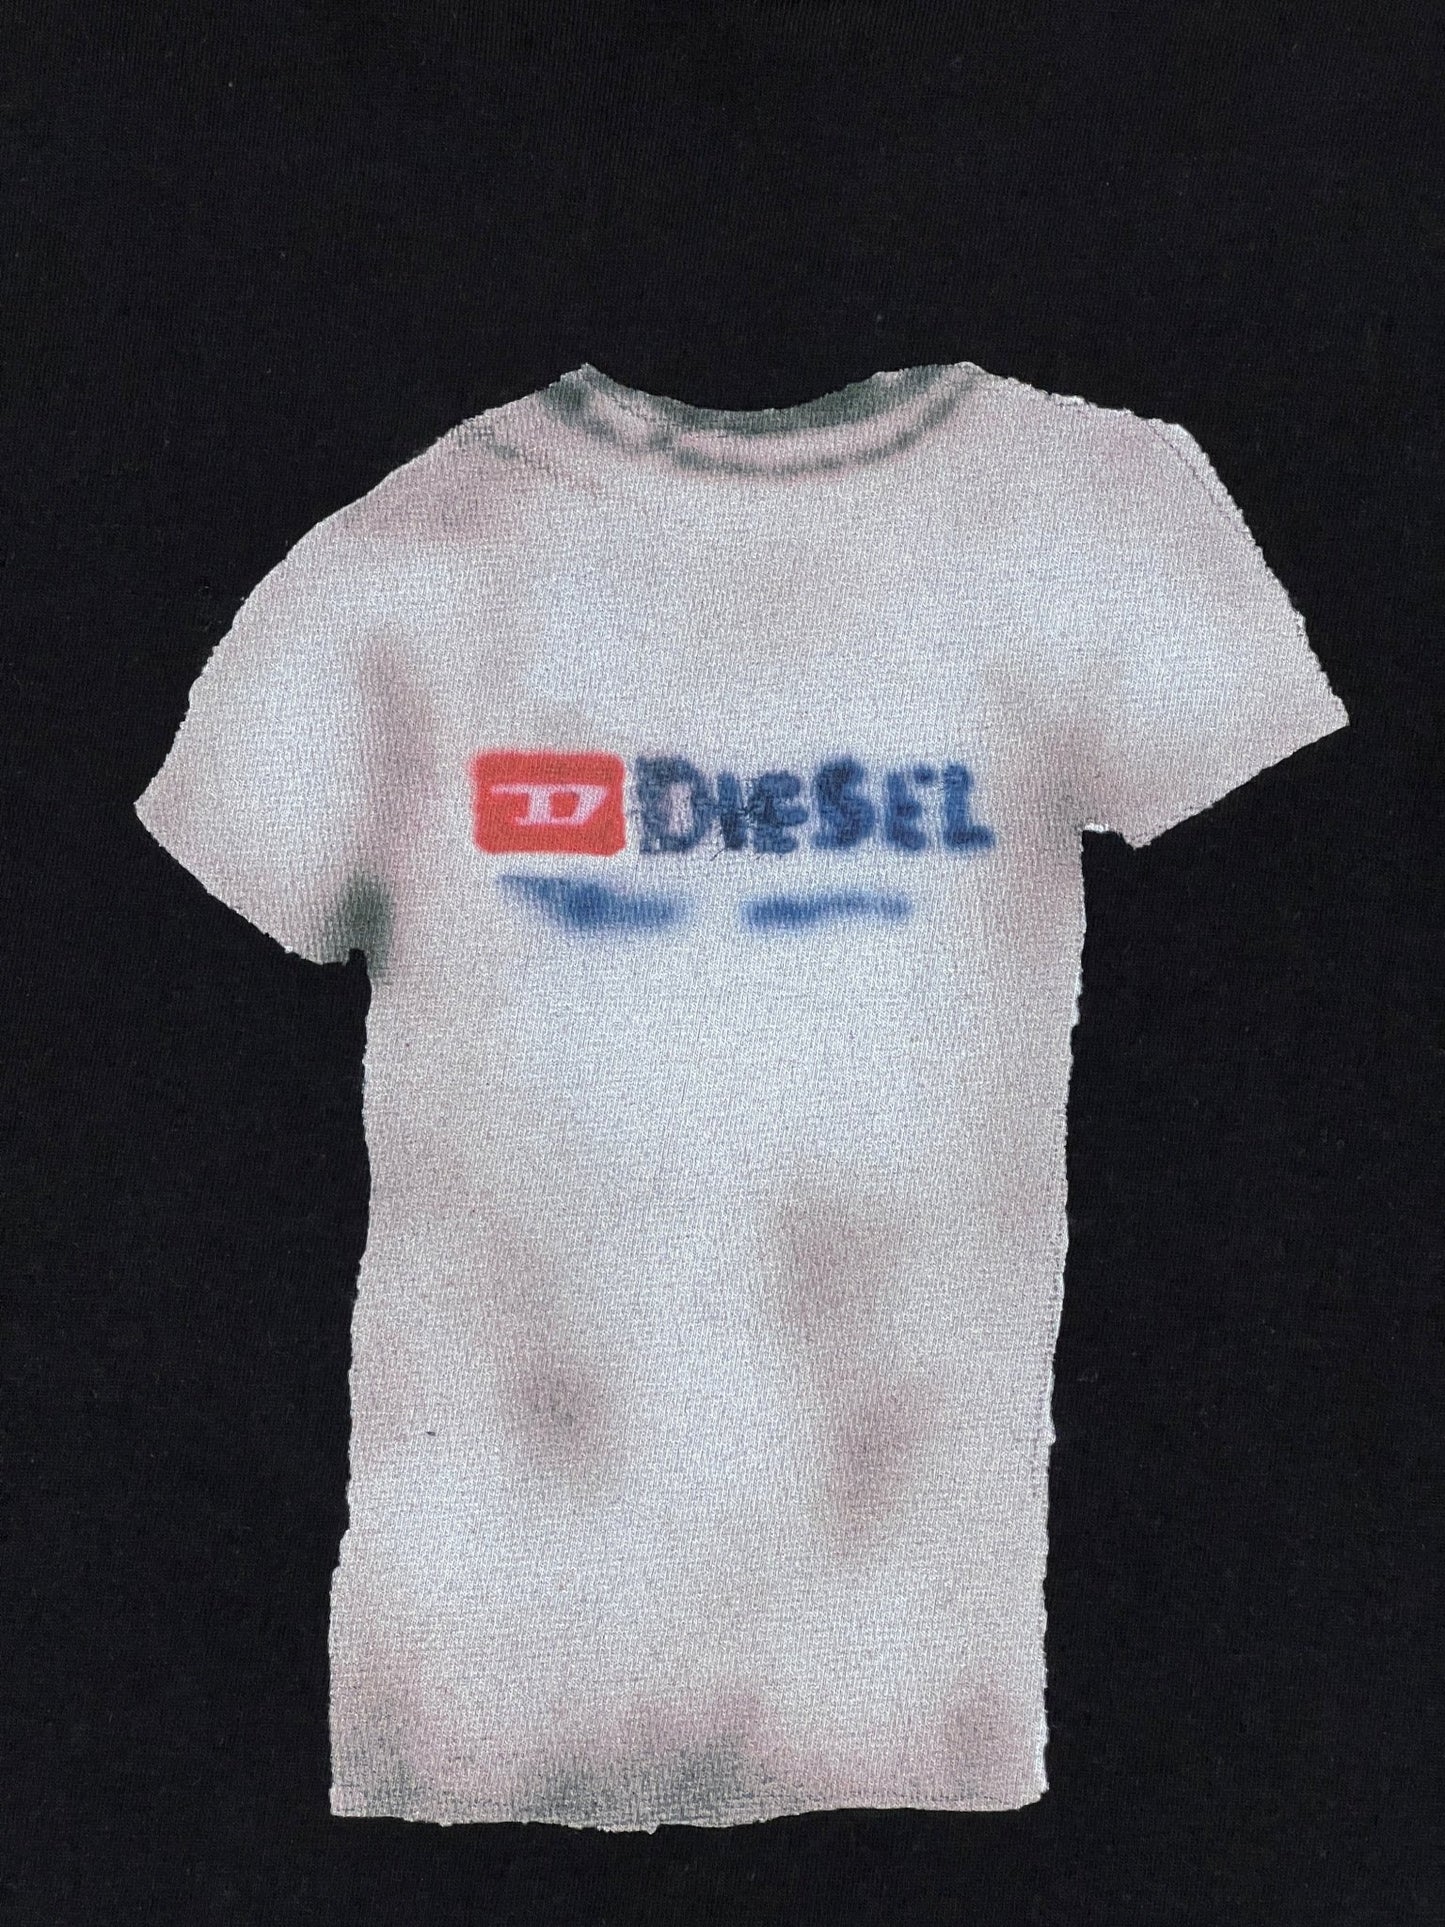 White relaxed-fit tee with DIESEL logo on a DIESEL T-BOXT-N12 T-SHIRT BLACK background.